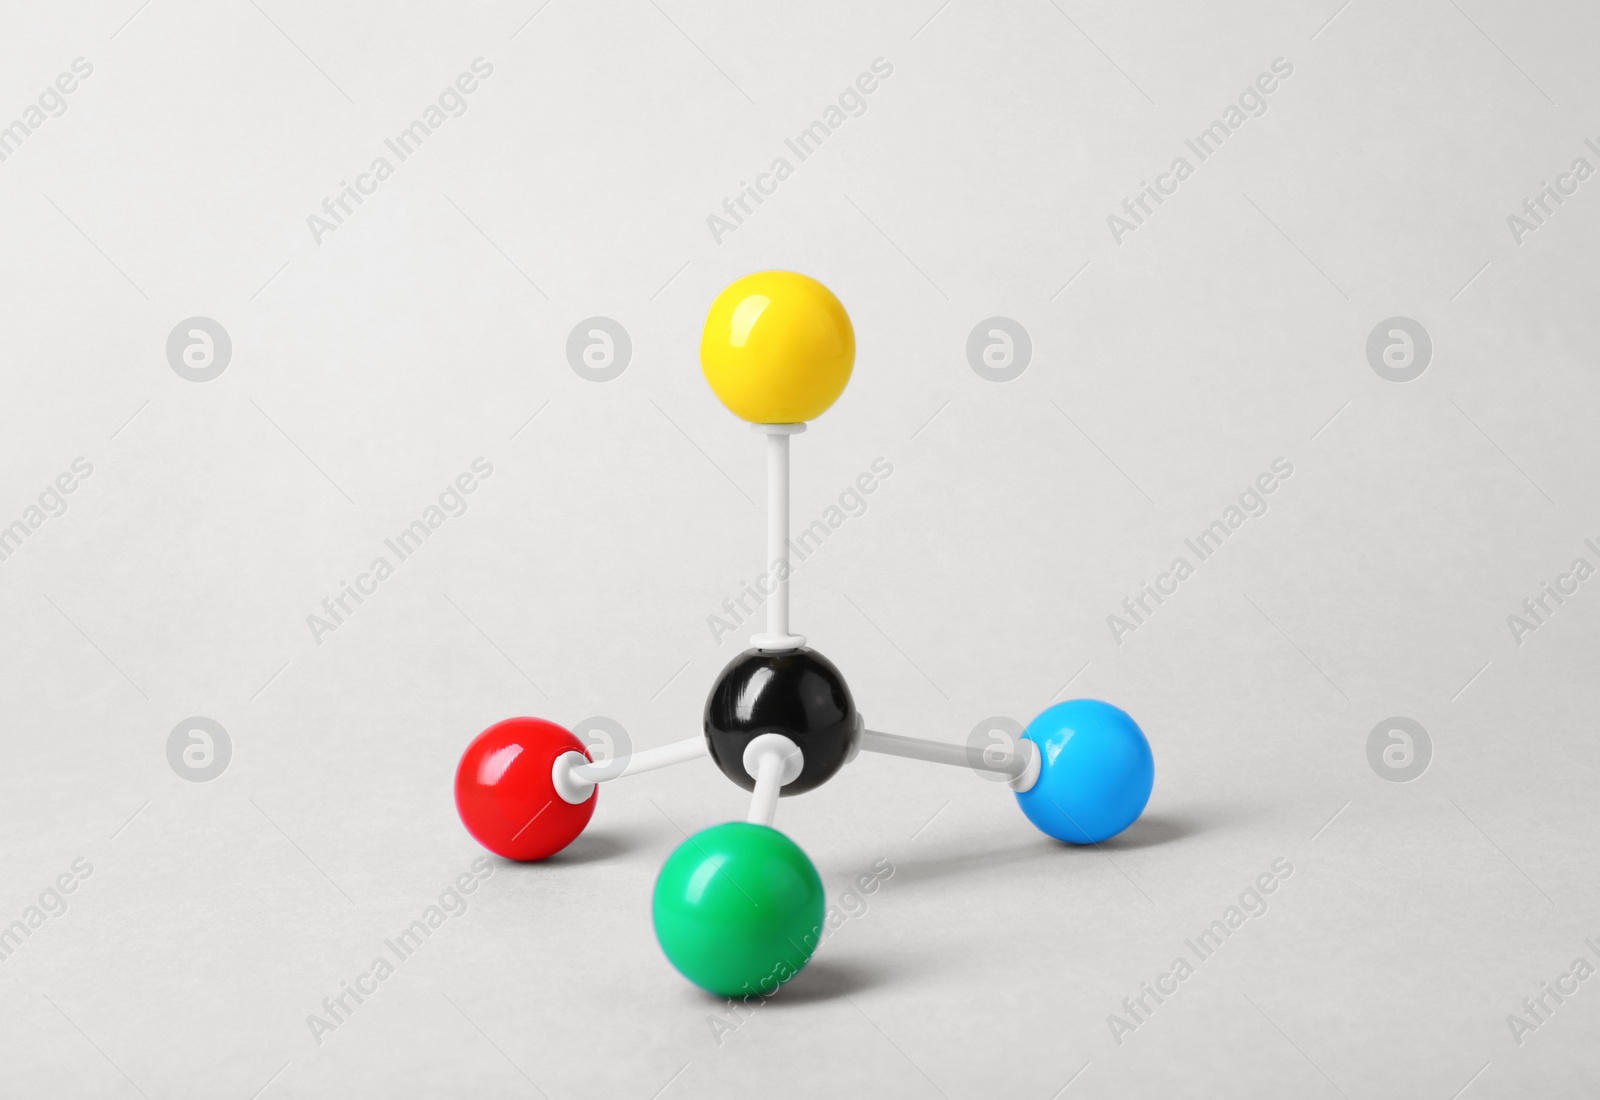 Photo of Molecular atom model on light grey background. Chemical structure